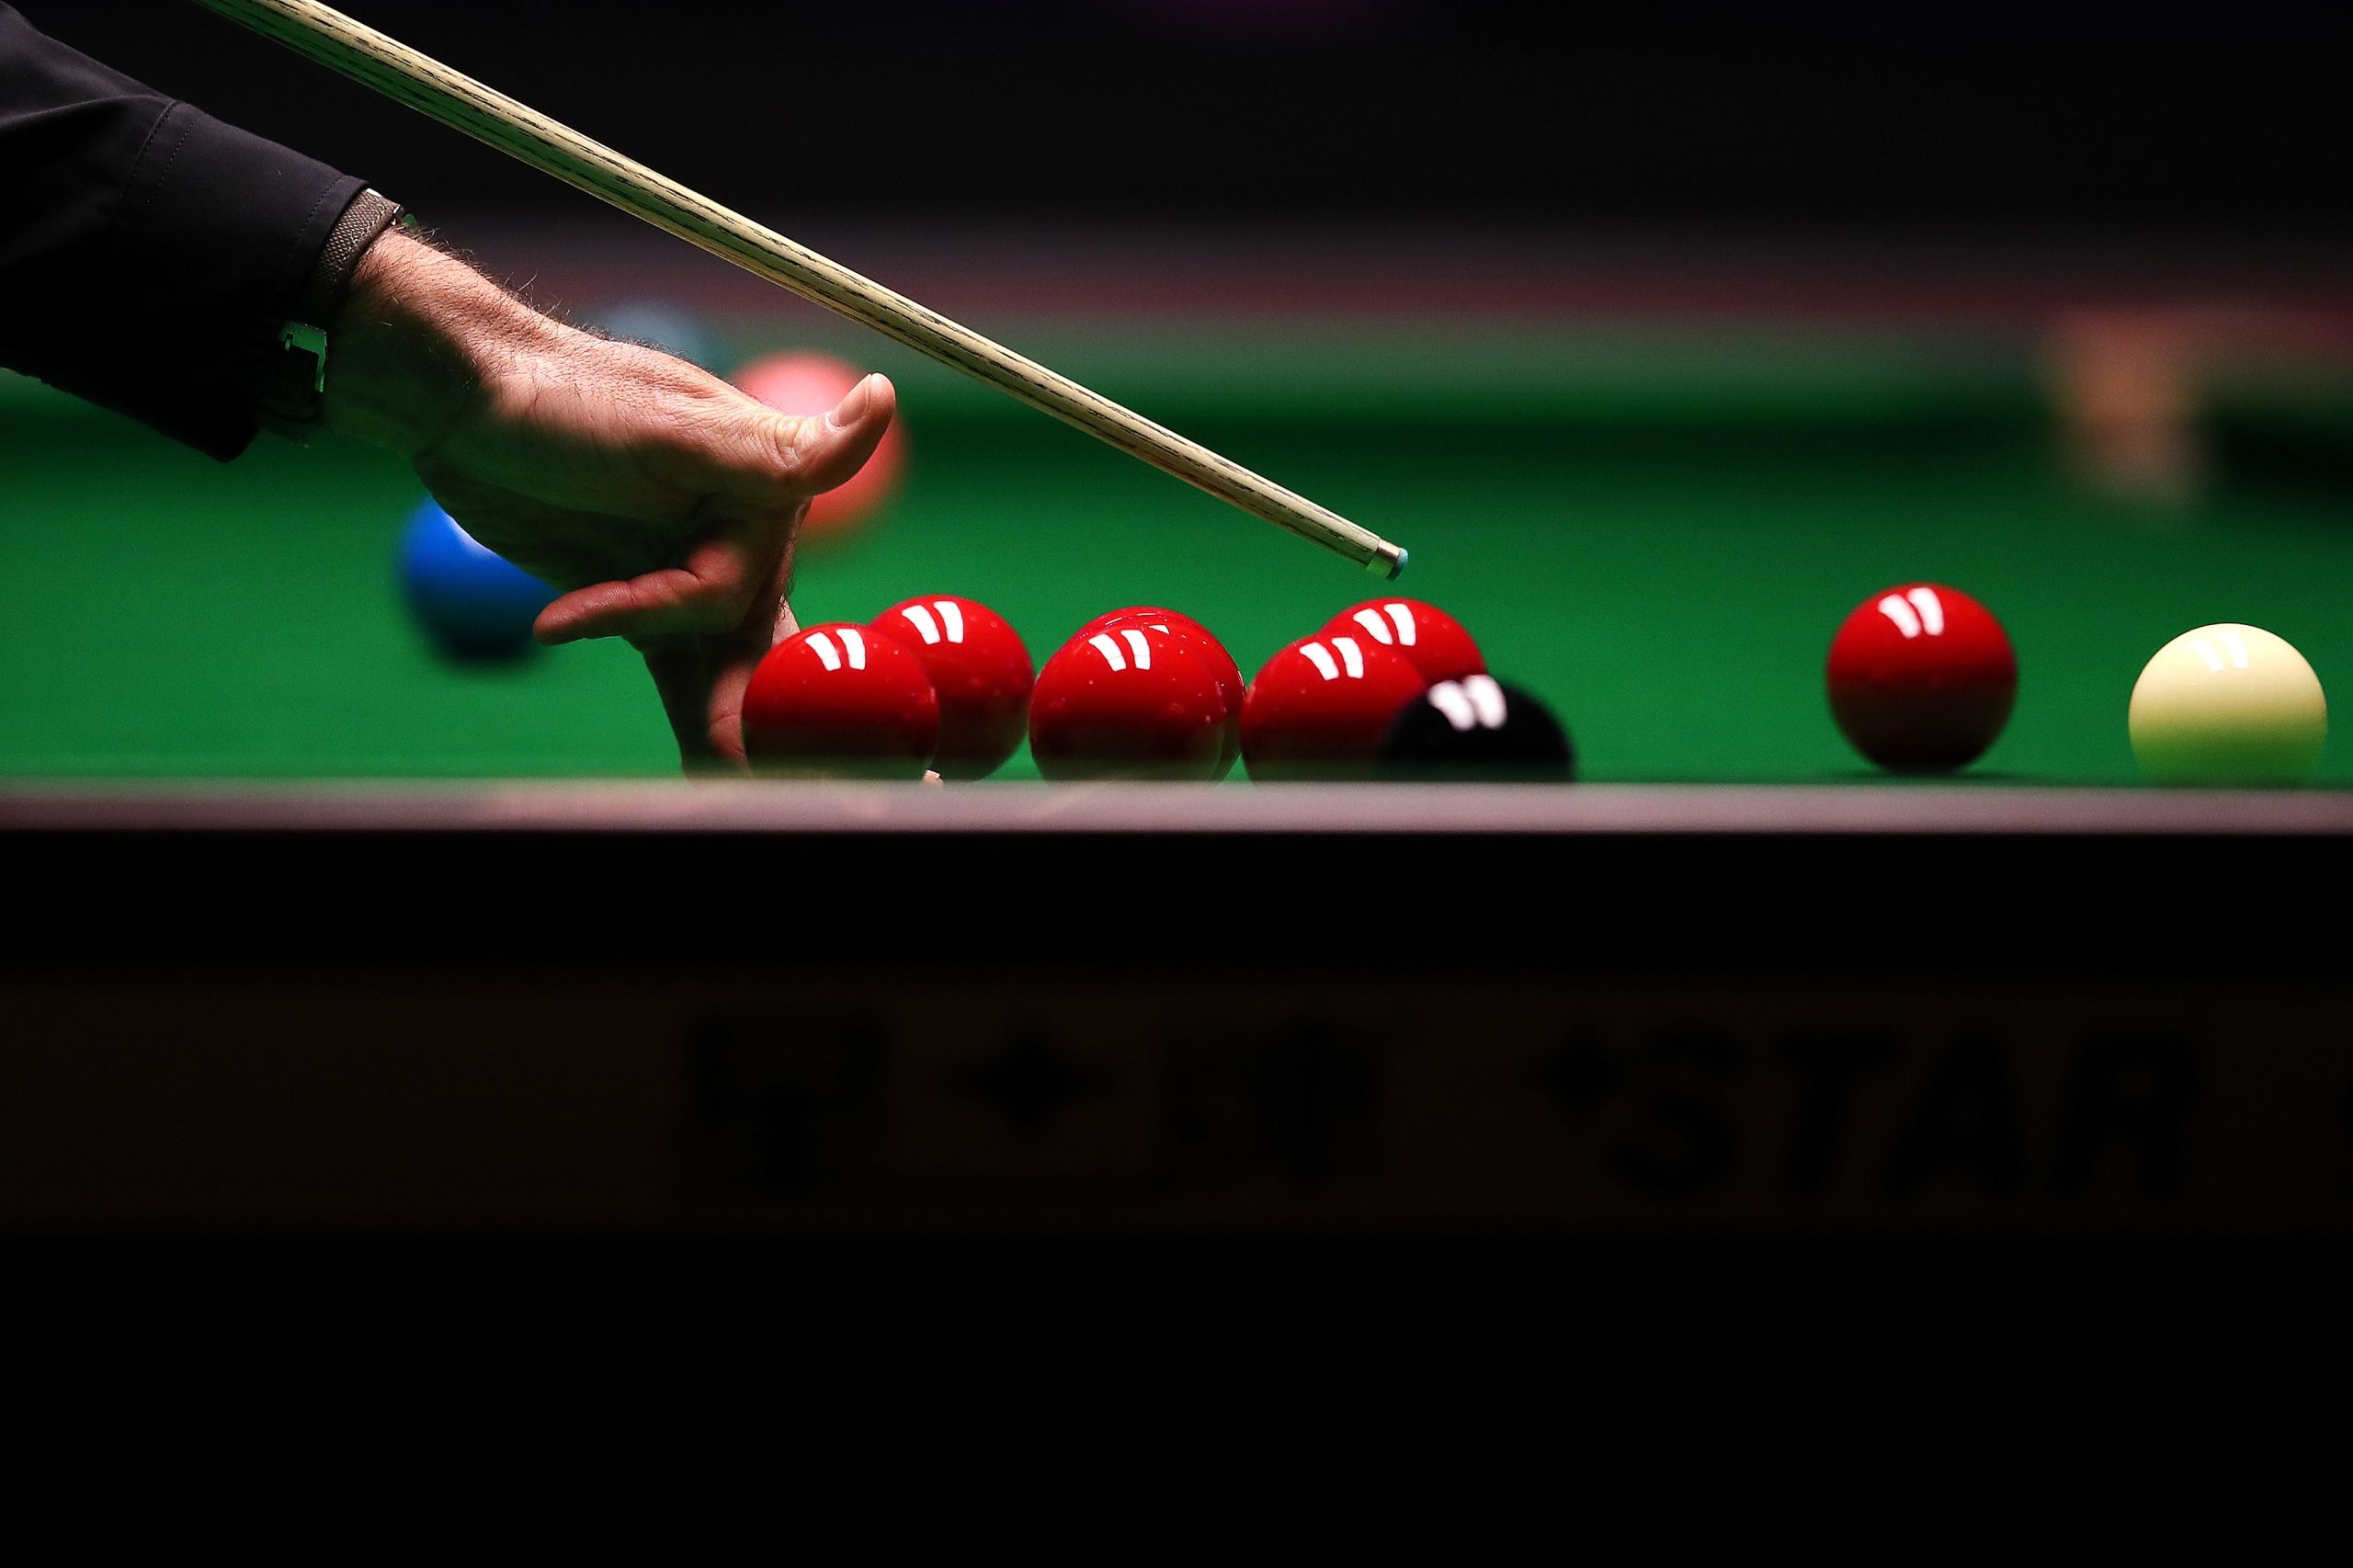 Snooker: The shot by Ronald O'Sullivan one of the best cue sports players in the history. 2560x1710 HD Wallpaper.